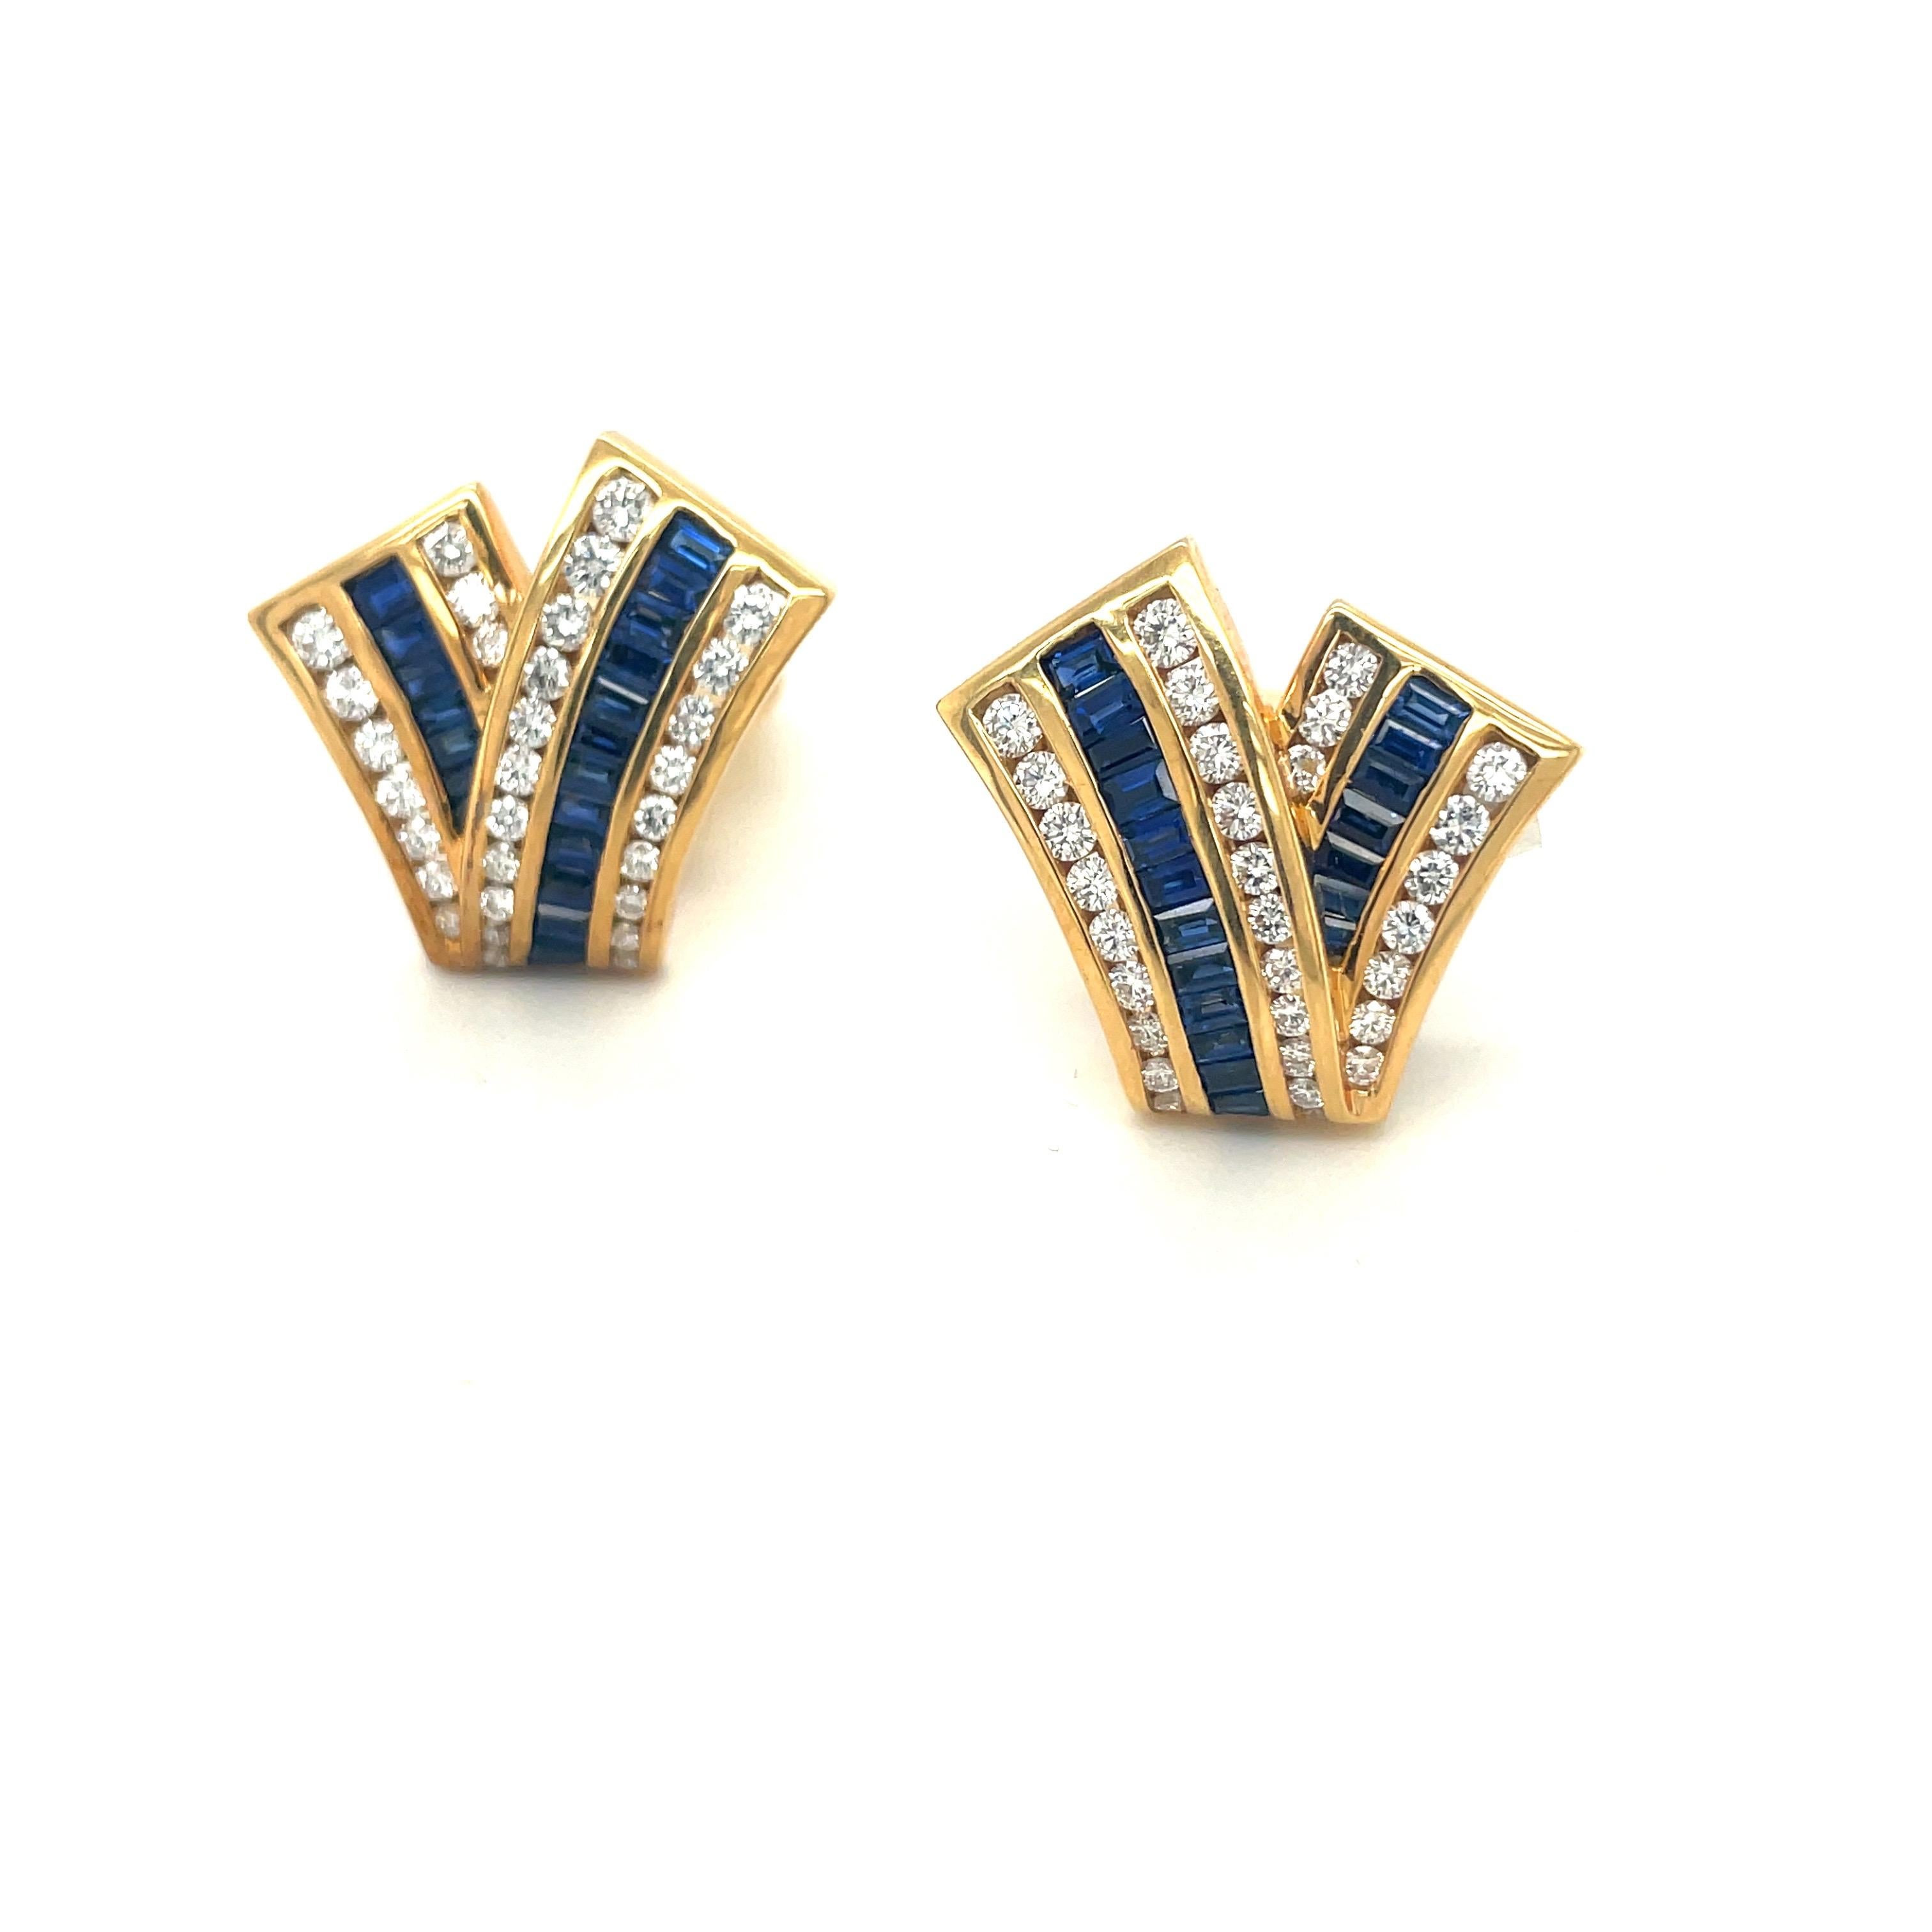 Charles Krypell Jewelry is a New York Based fine jewelry brand that became internationally known for its exquisite use of color, novel designs, and outstanding craftsmanship. 
Set in 18 karat yellow gold, these earrings are designed as a free